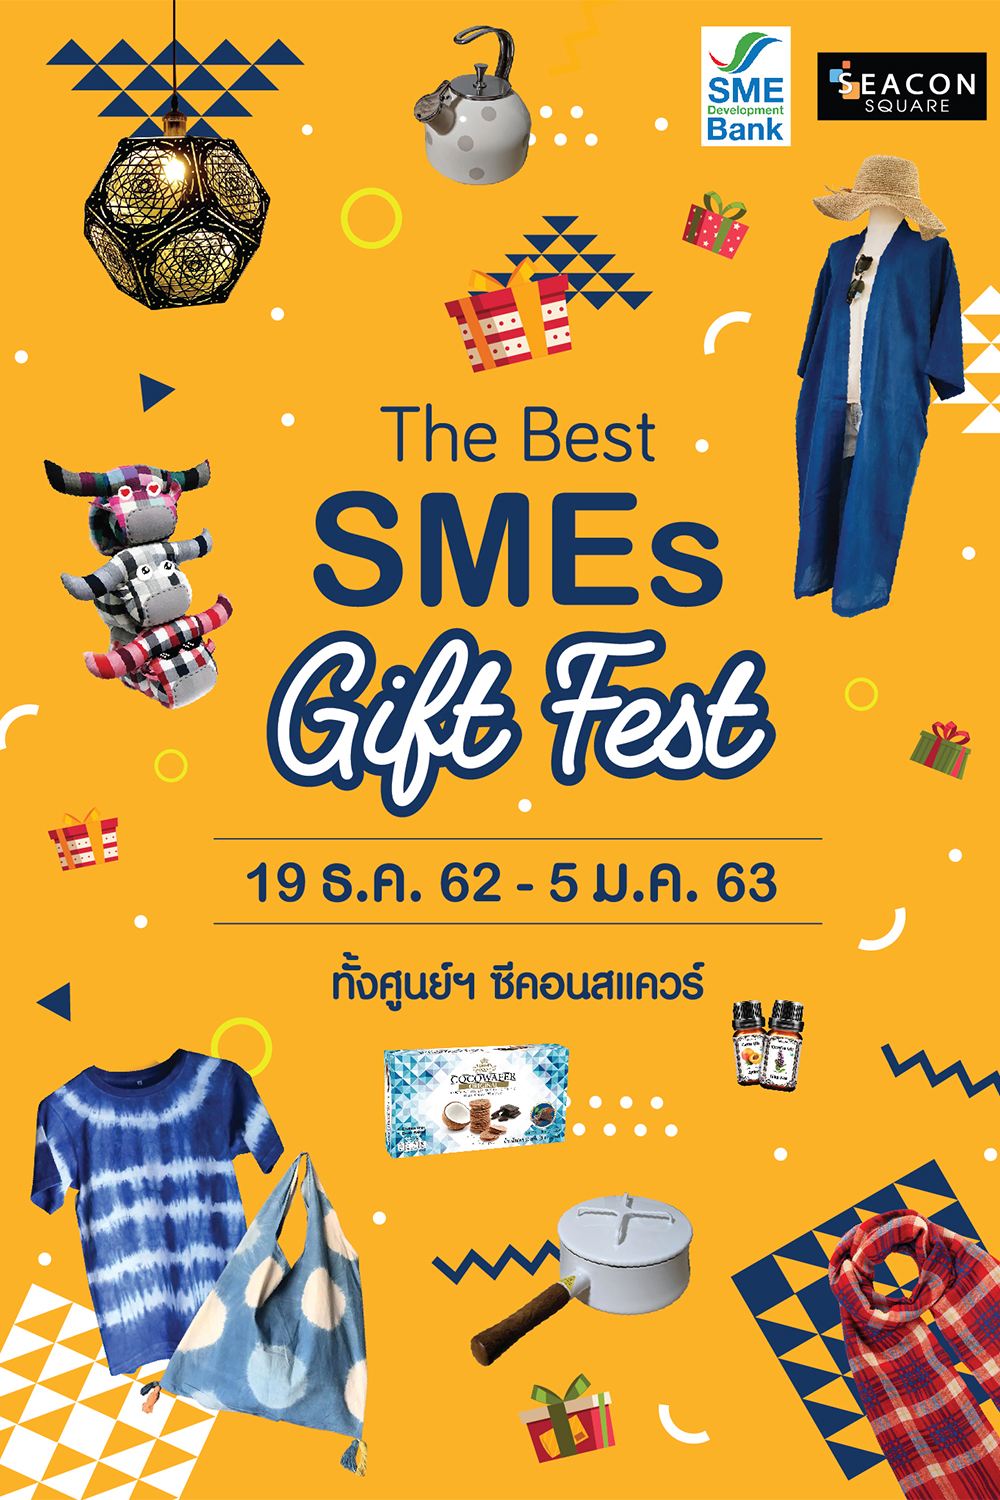 The Best SMEs Gift Fest